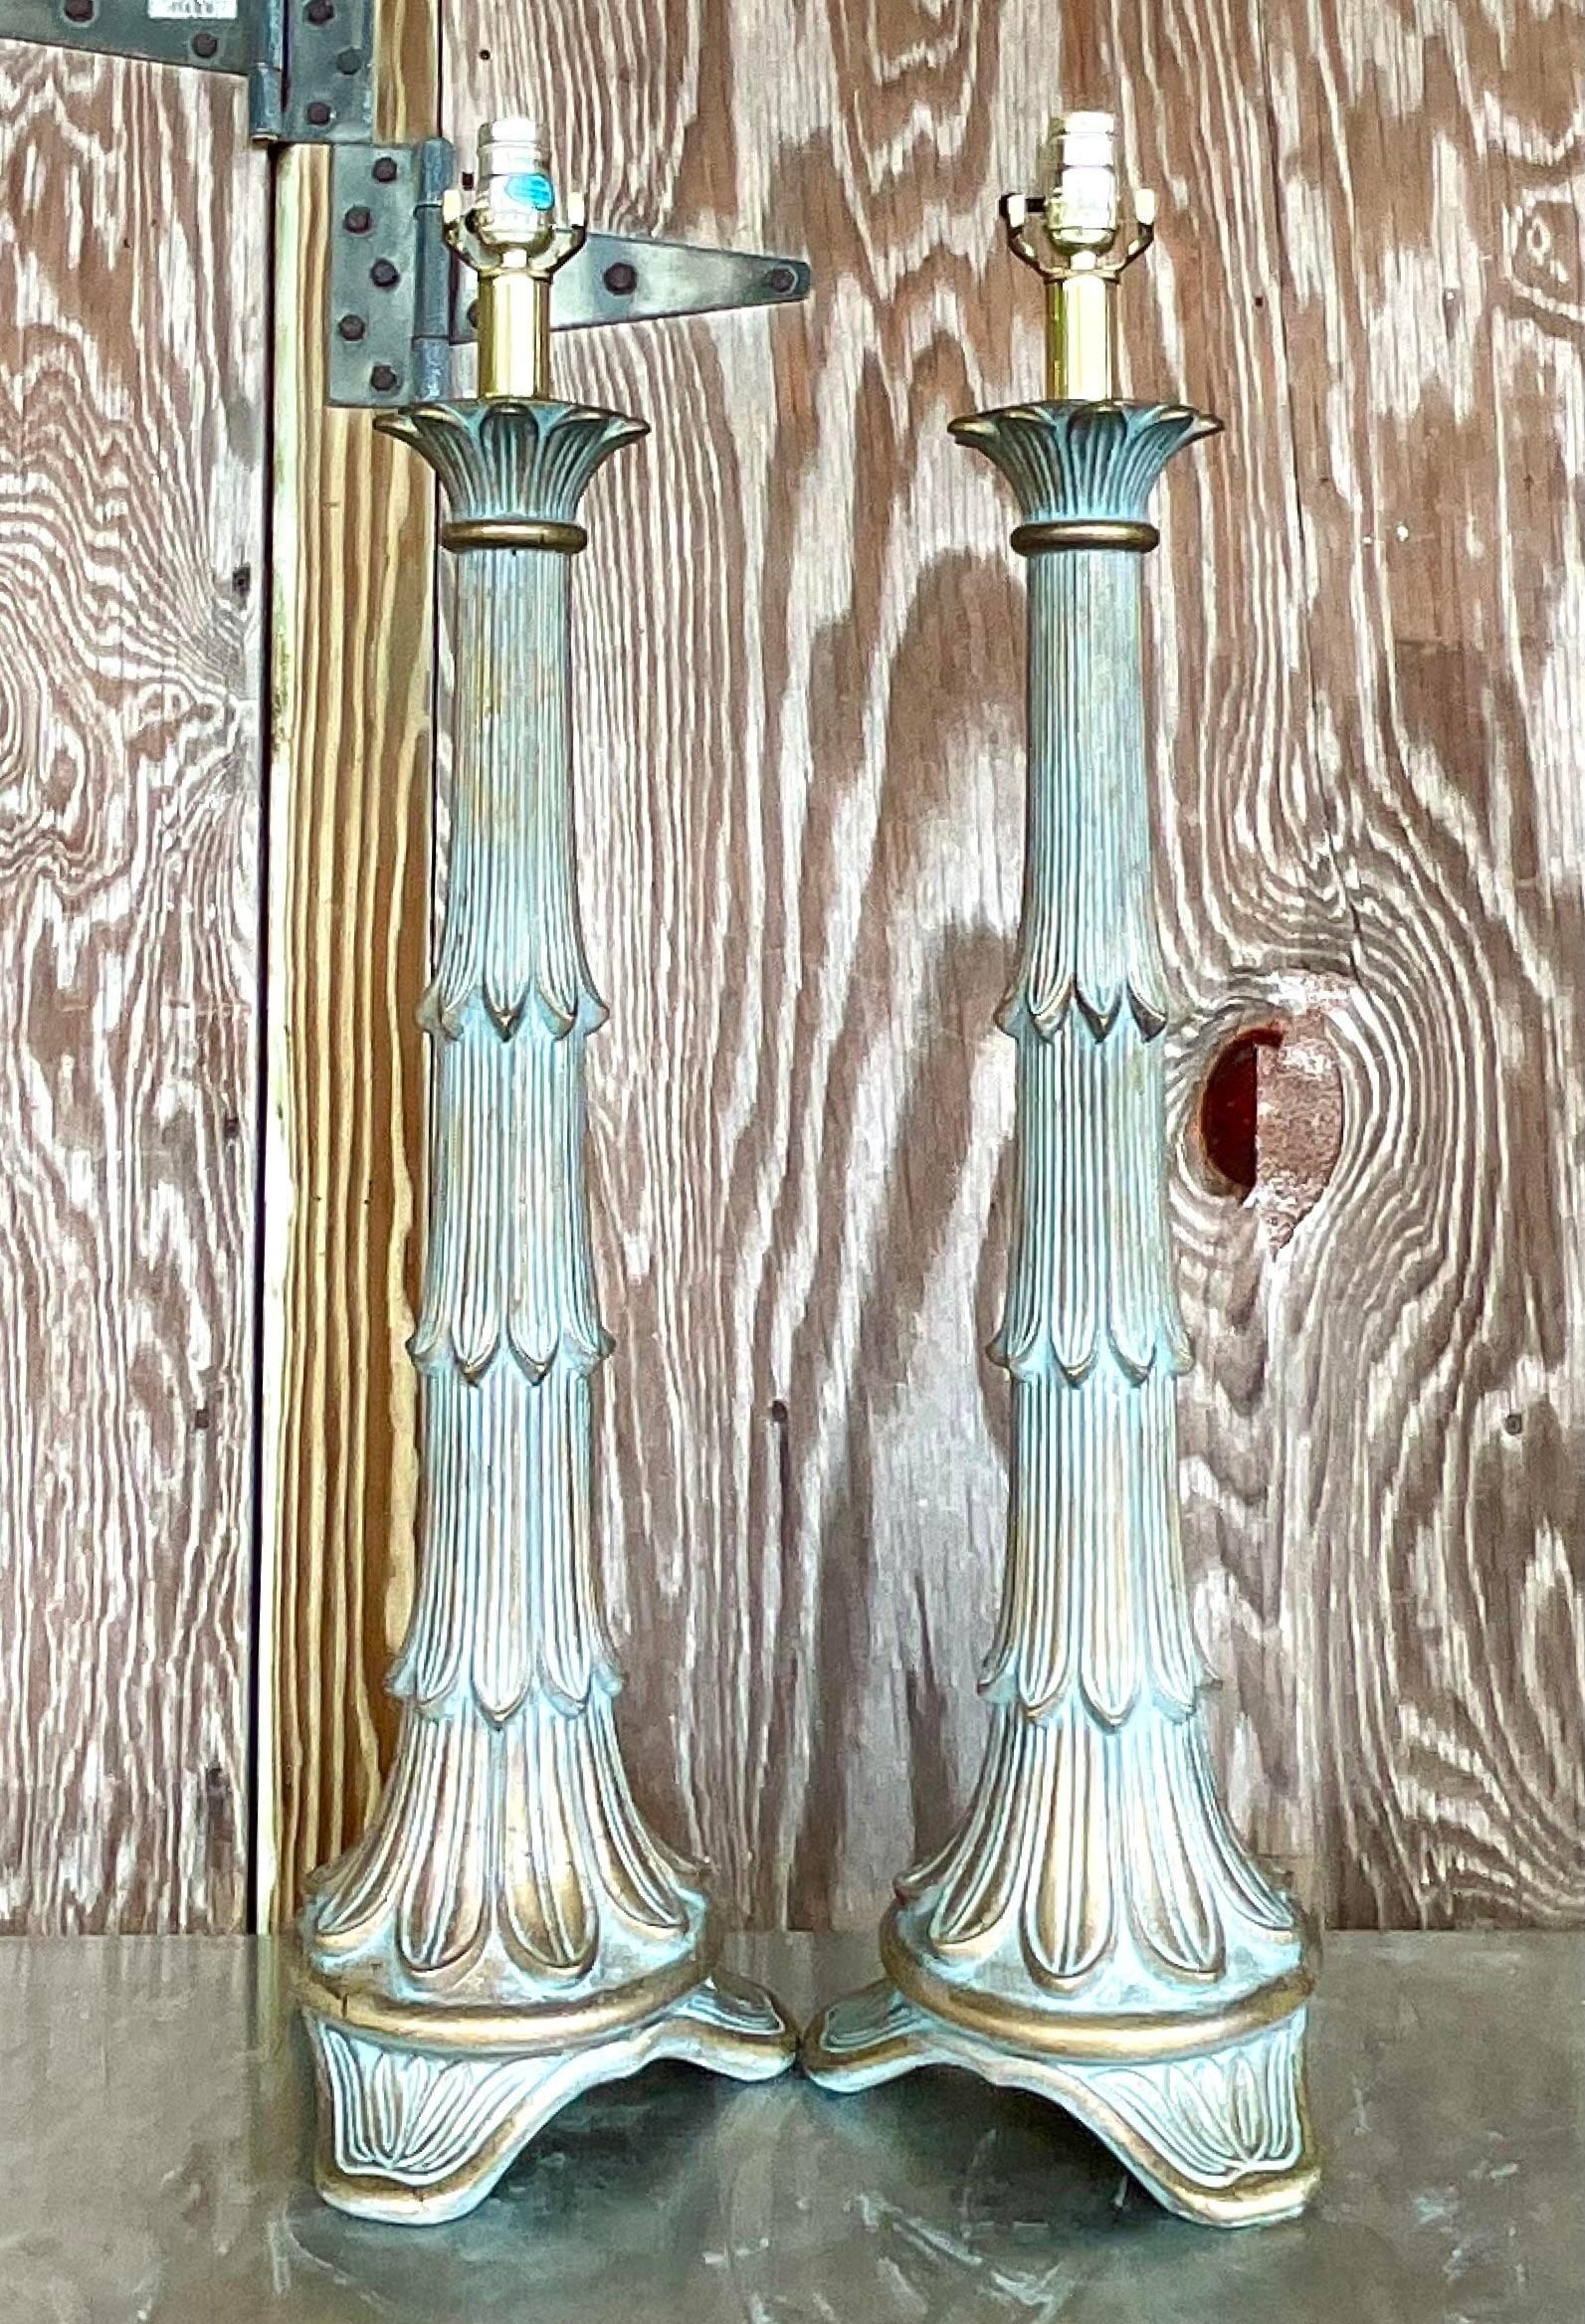 Late 20th Century Vintage Regency Florentine Plaster Table Lamps - a Pair In Good Condition For Sale In west palm beach, FL